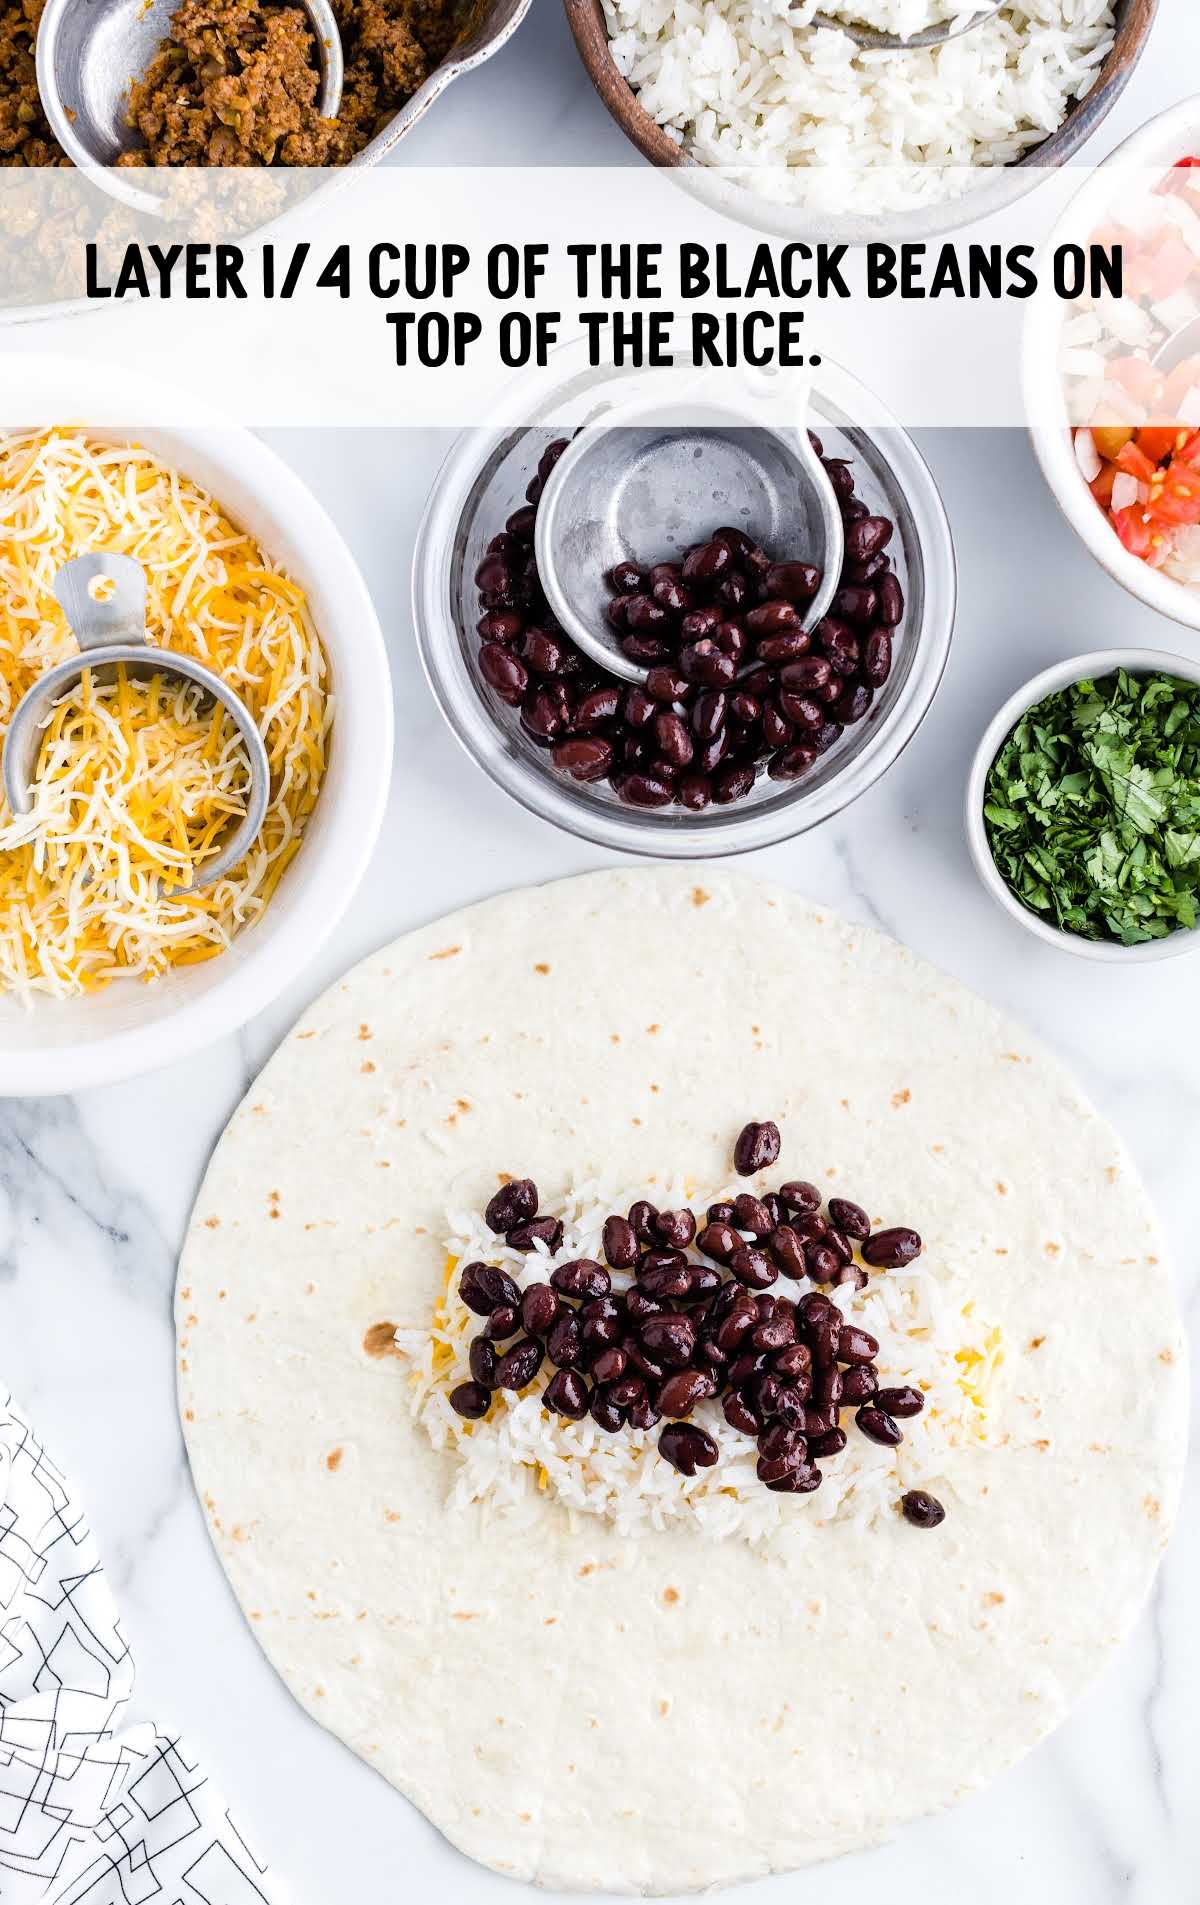 black beans being placed on top of the white rice on the tortilla